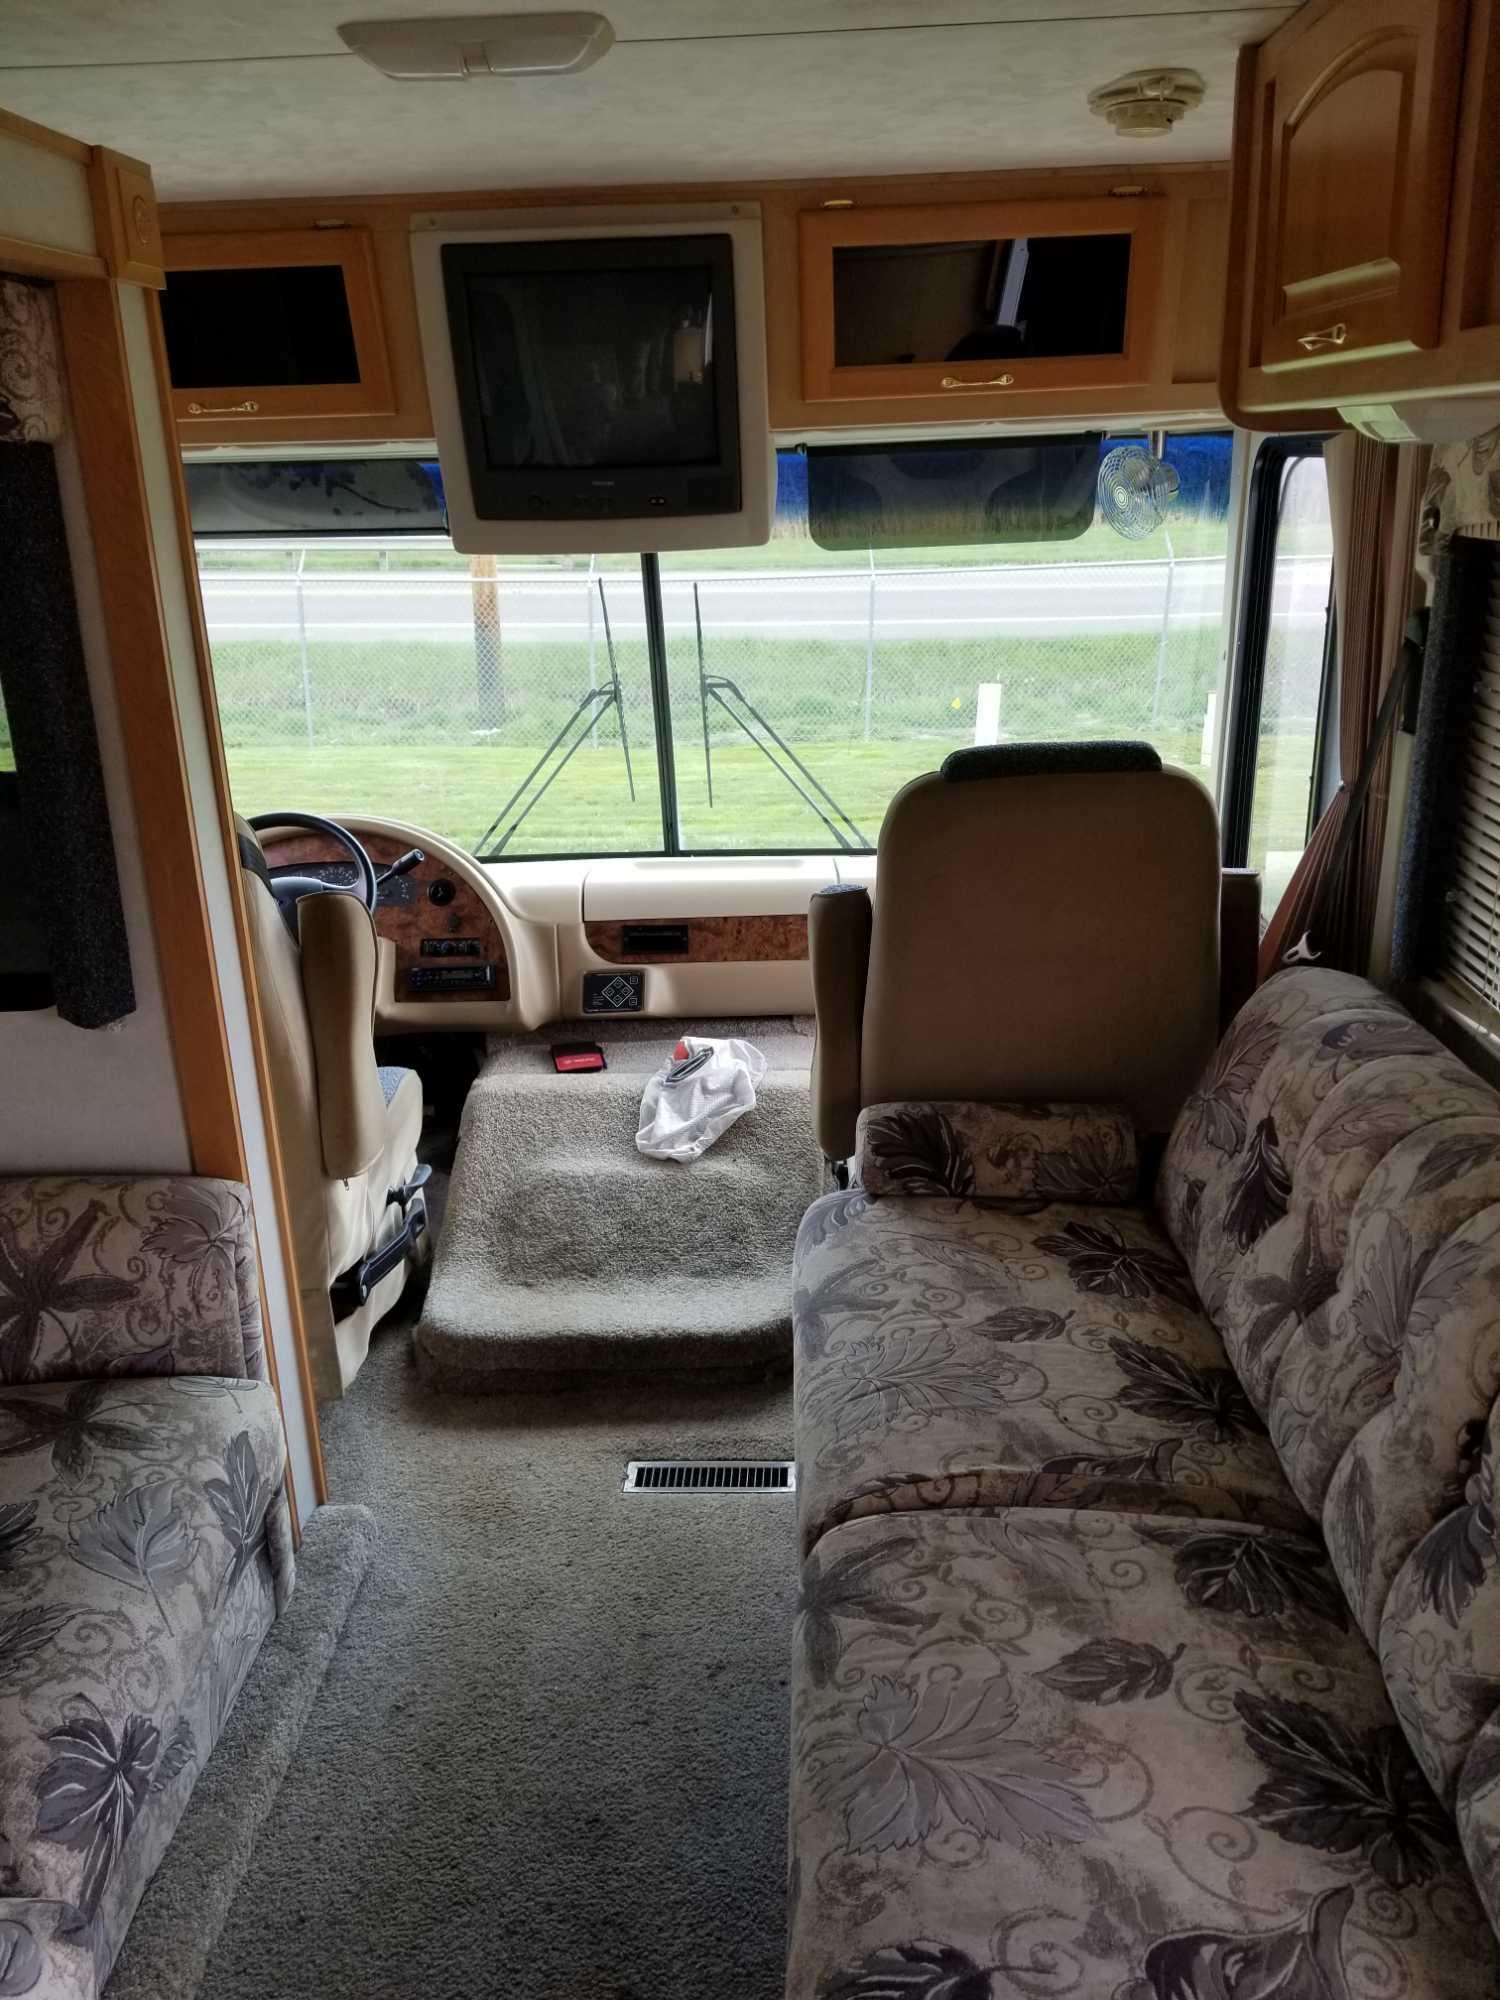 2004 32 ft Daybreak by Damon motor home, 1 slide out, 21,533 miles, runs, needs brakes looked at